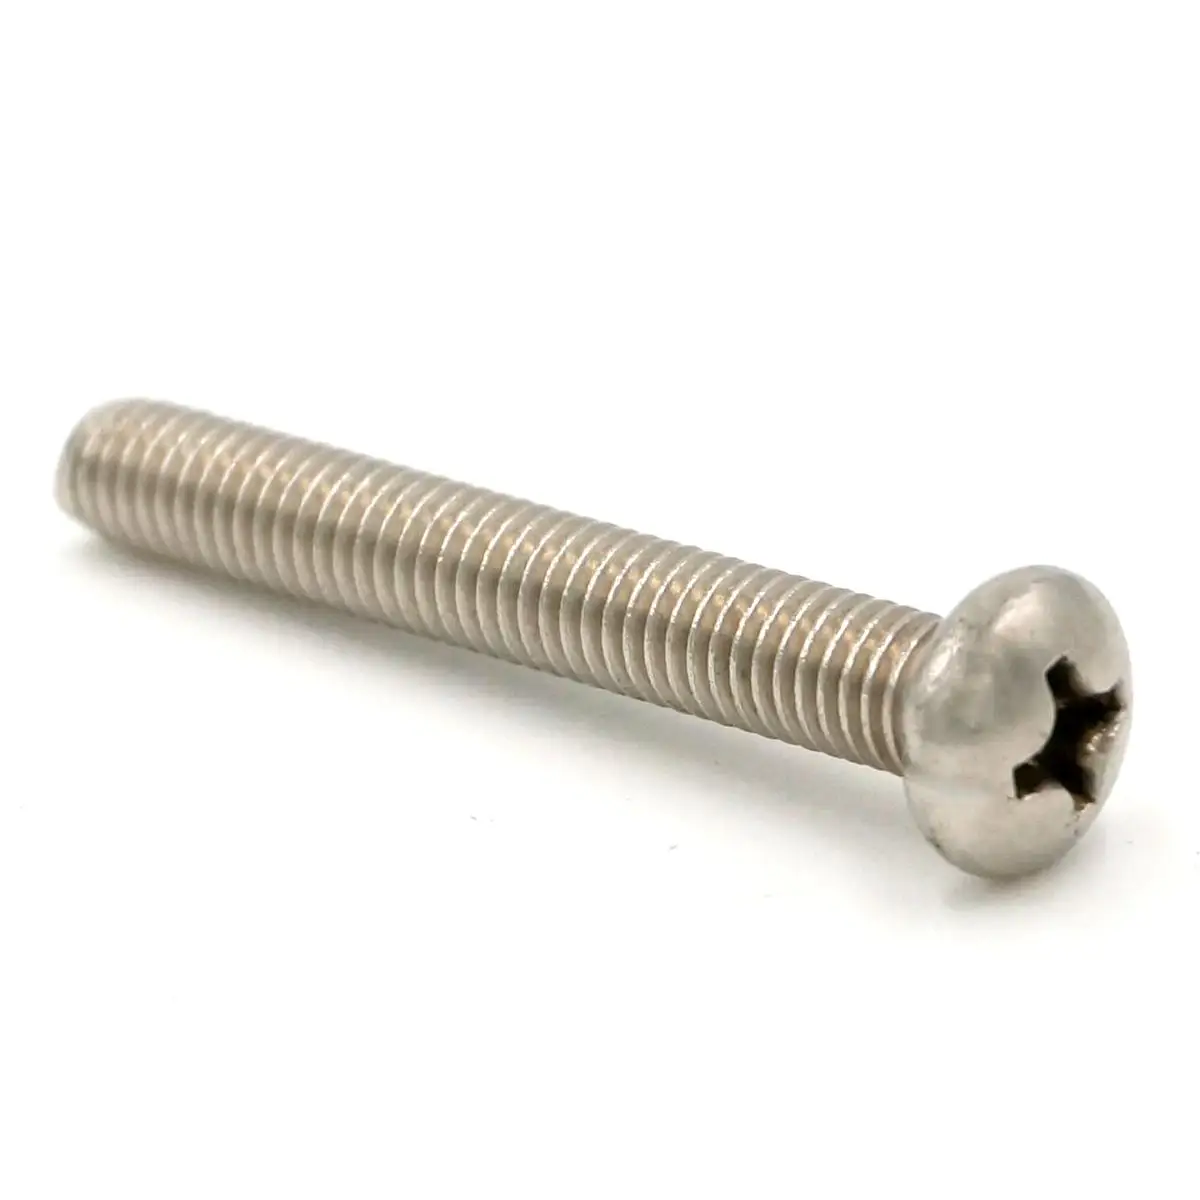 

10pcs M5*35 Pitch 0.8 Phillips Pan Head 304 Stainless Steel Cross Recessed Machine Screws Cap Bolts Nuts